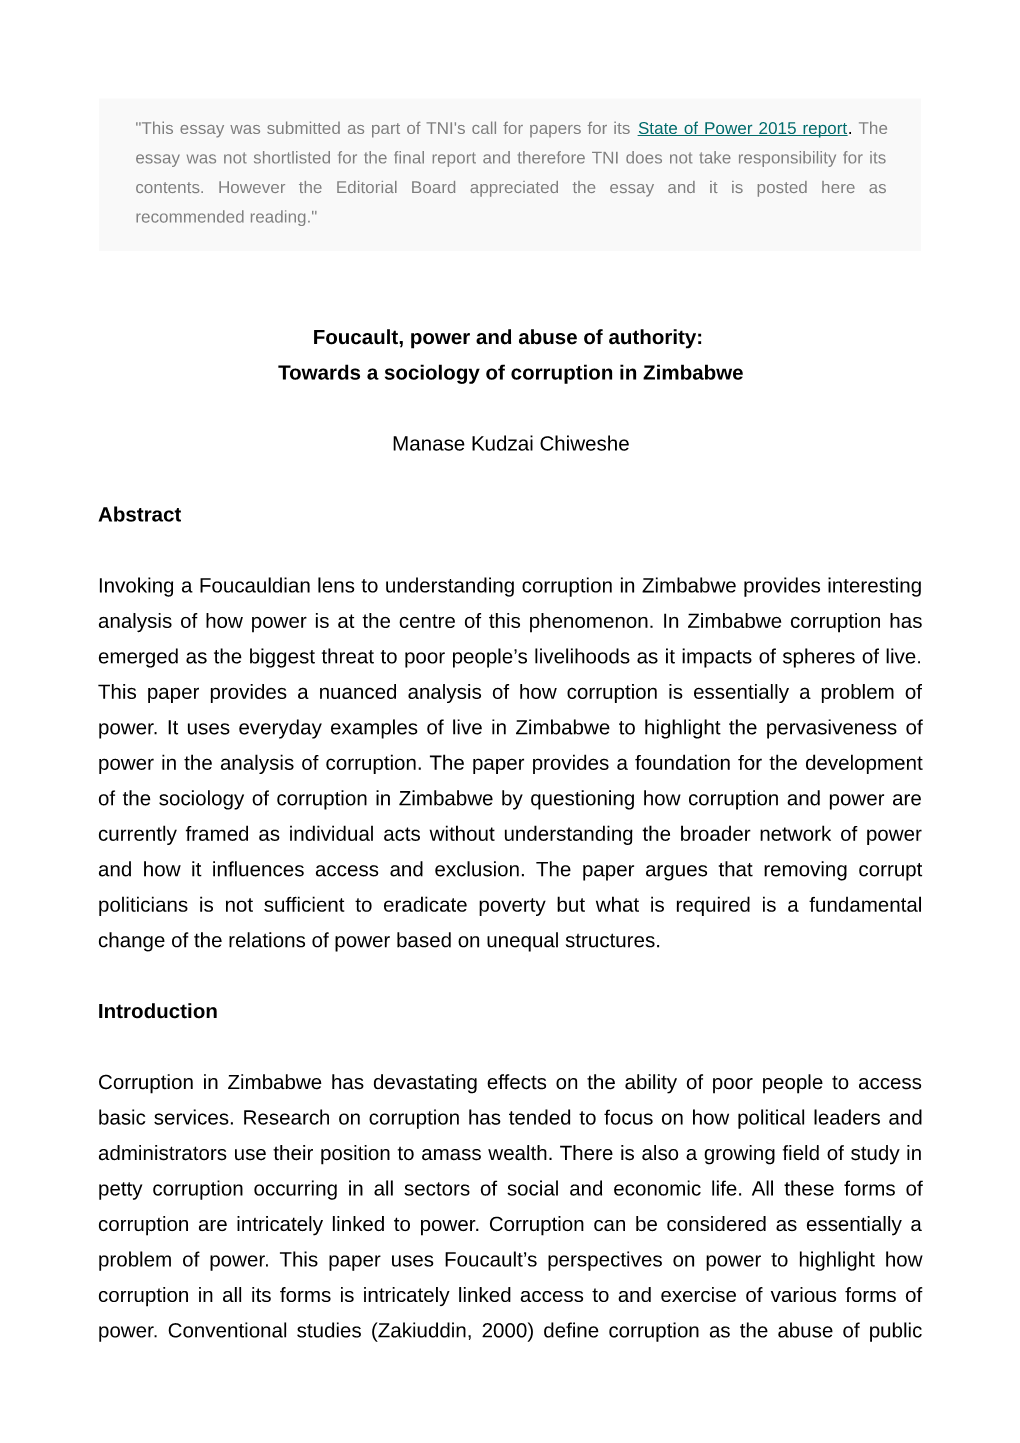 Foucault, Power and Abuse of Authority: Towards a Sociology of Corruption in Zimbabwe